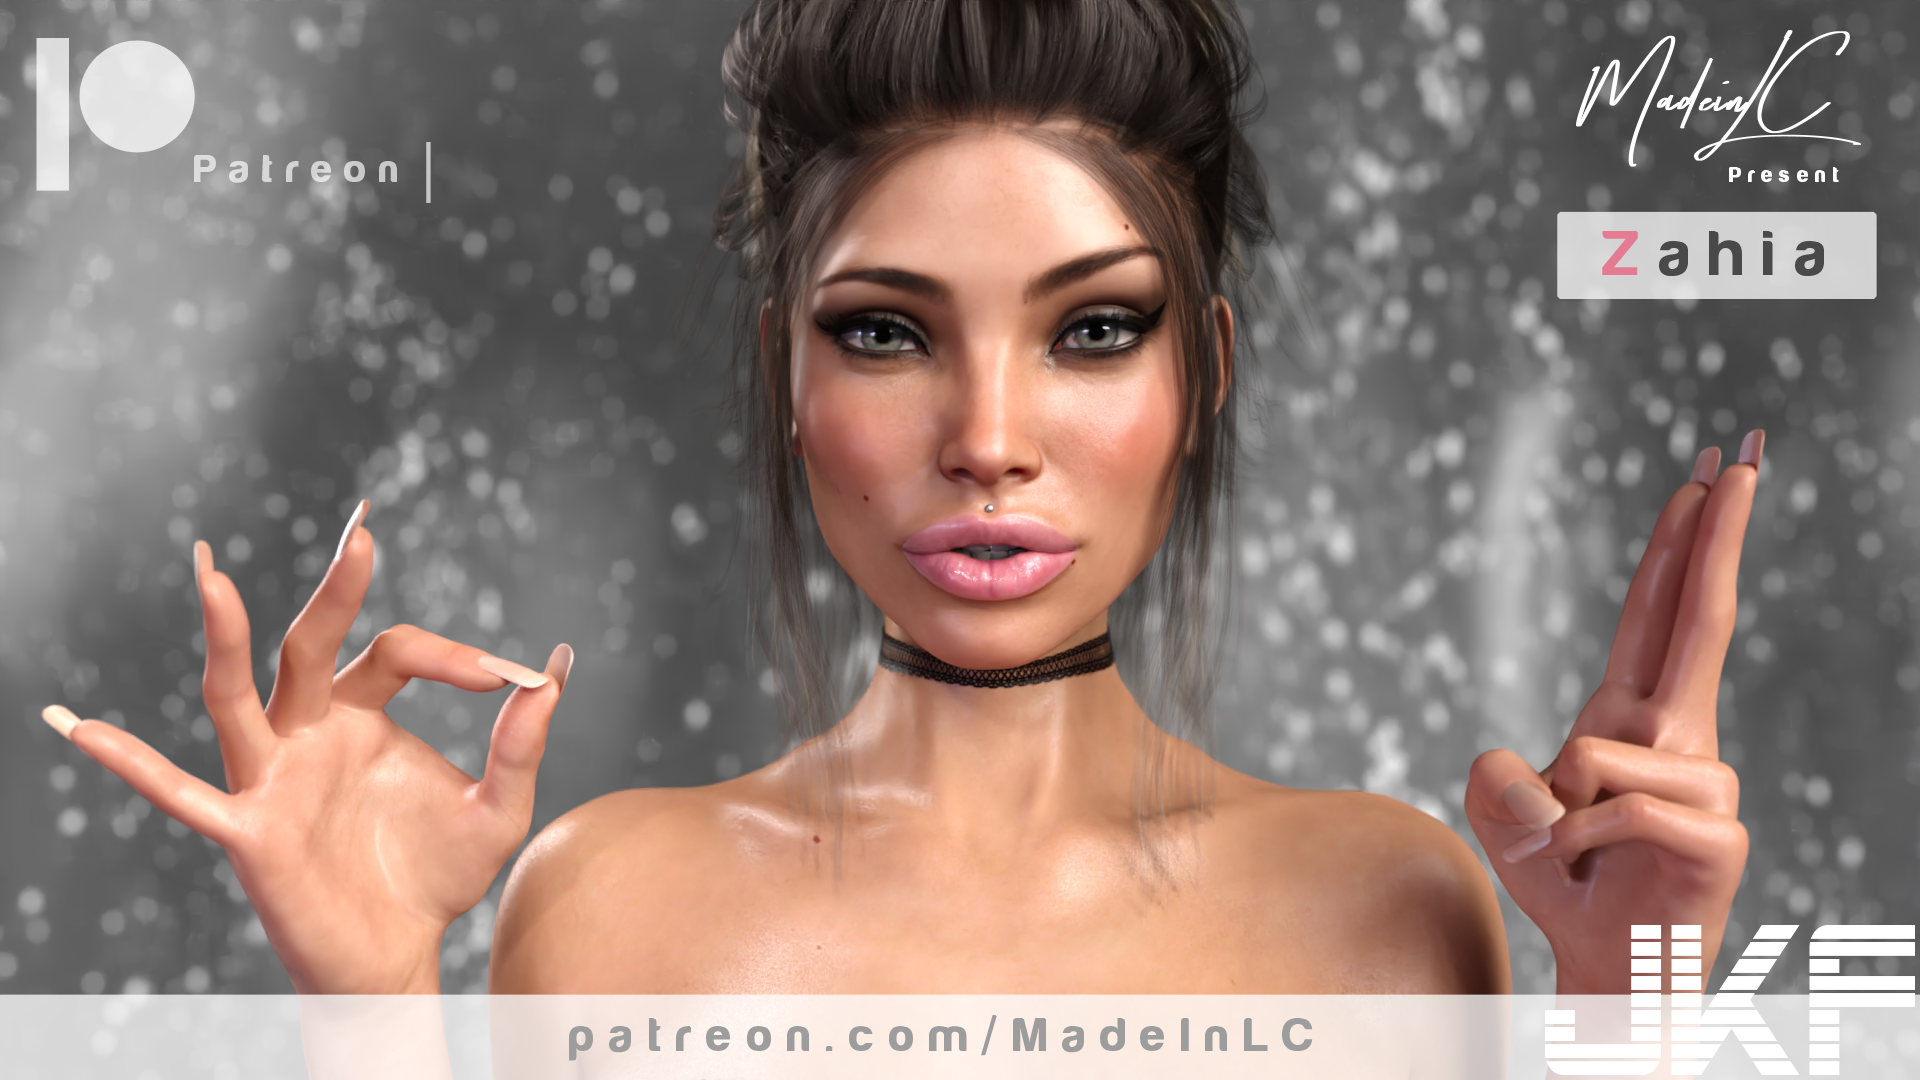 the_new_zahia_is_coming_on_patreon_by_madeinlc_dcmbxew.png